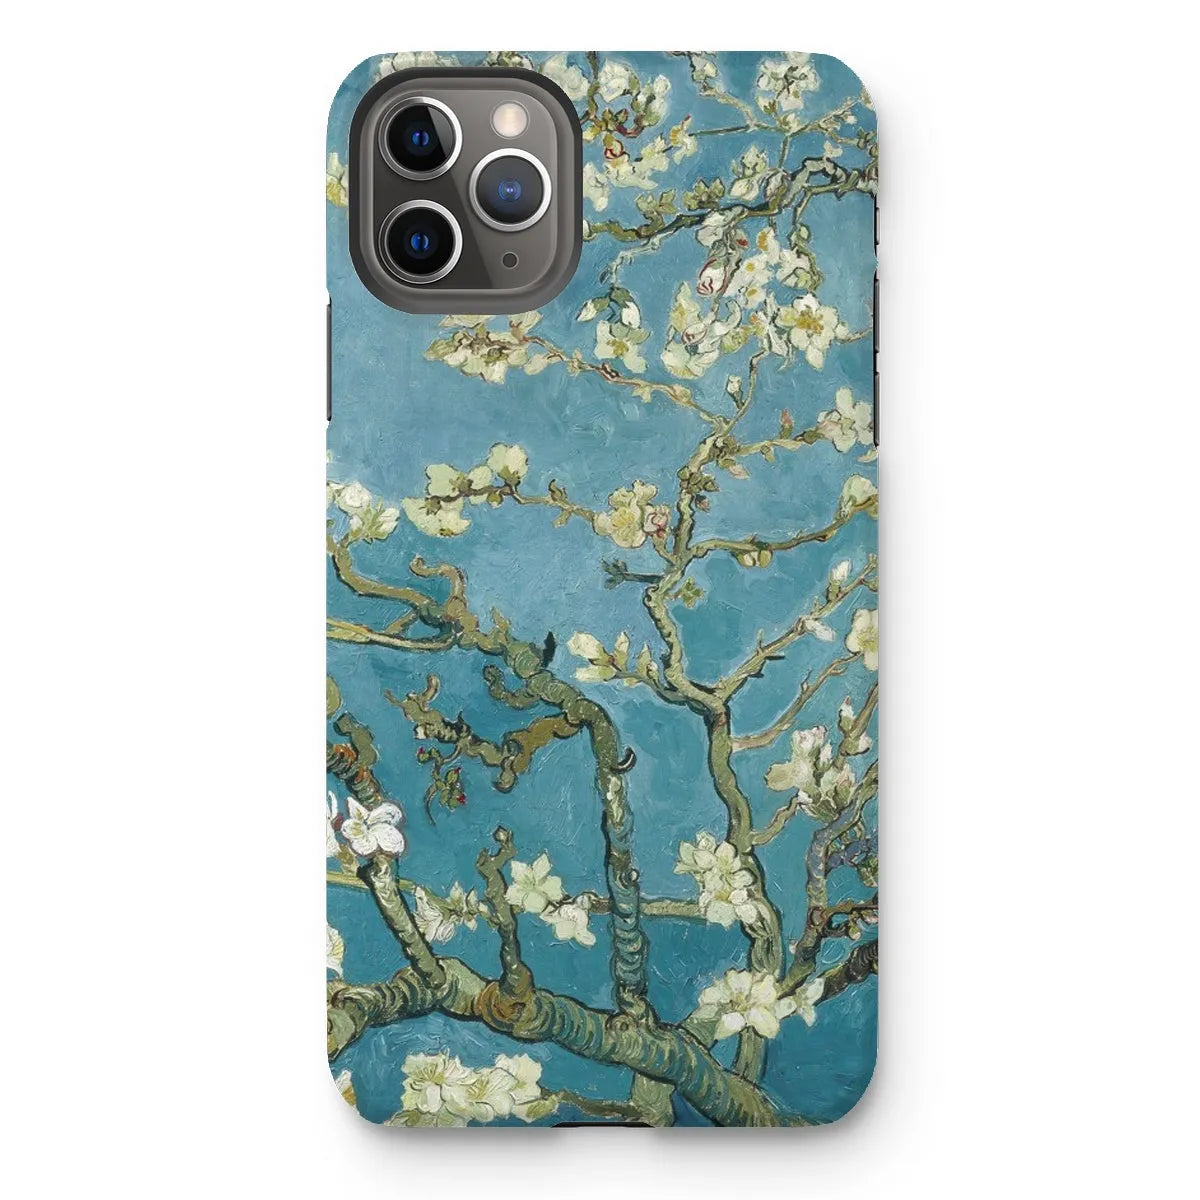 Almond Blossom - Vincent Van Gogh Aesthetic Phone Case - Iphone 11 Pro Max / Matte - Mobile Phone Cases - Aesthetic Art